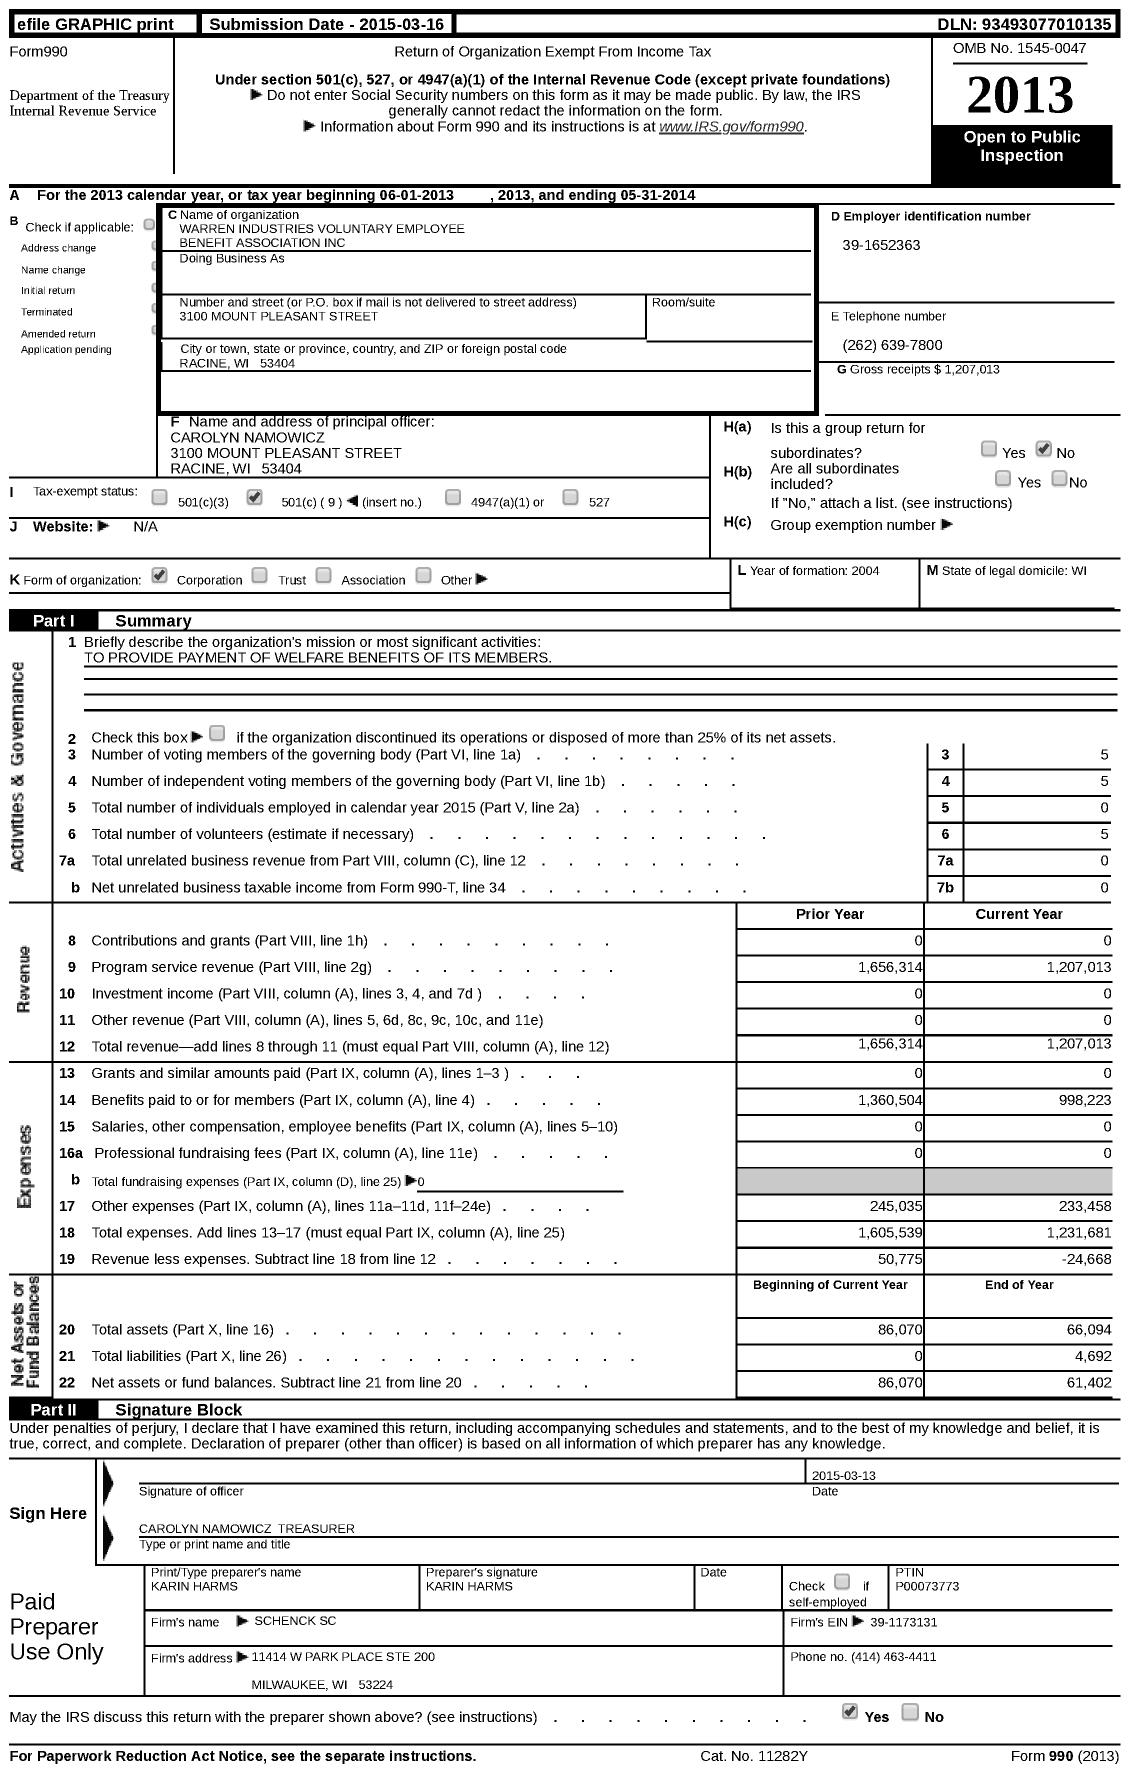 Image of first page of 2013 Form 990 for Warren Industries Voluntary Employee Benefit Association